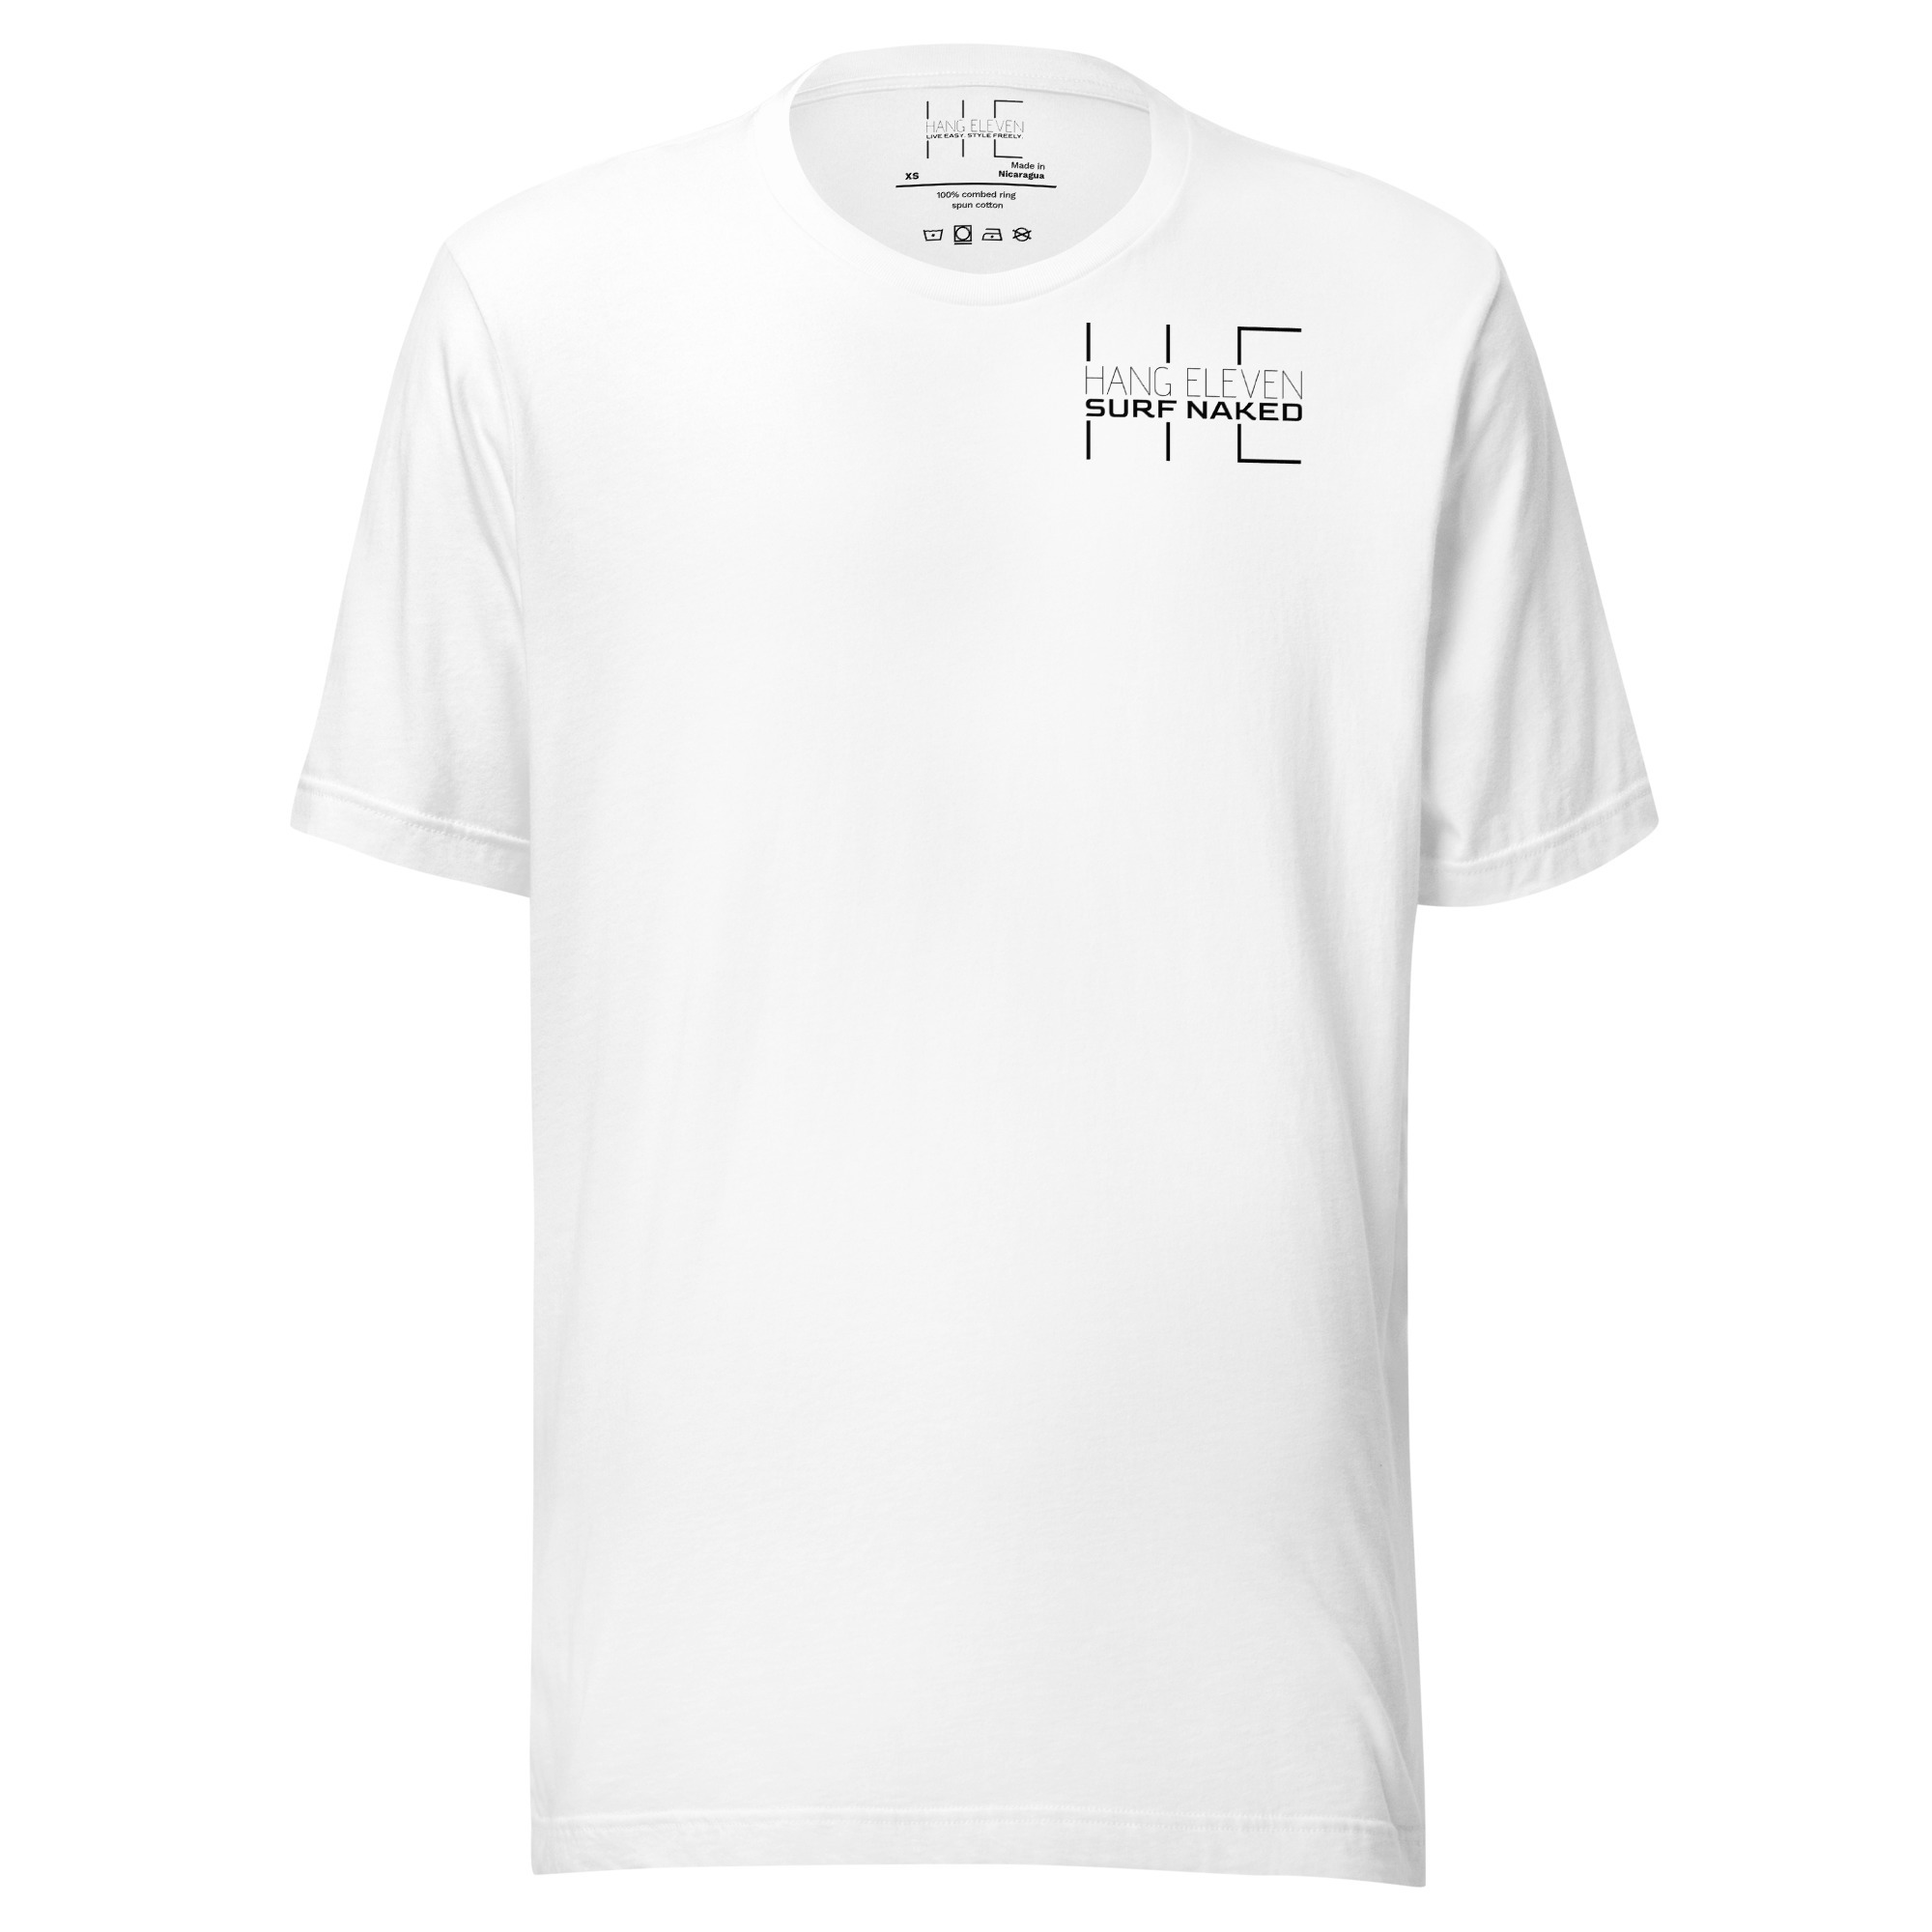 Hang Eleven Surf Naked T-Shirt (White)